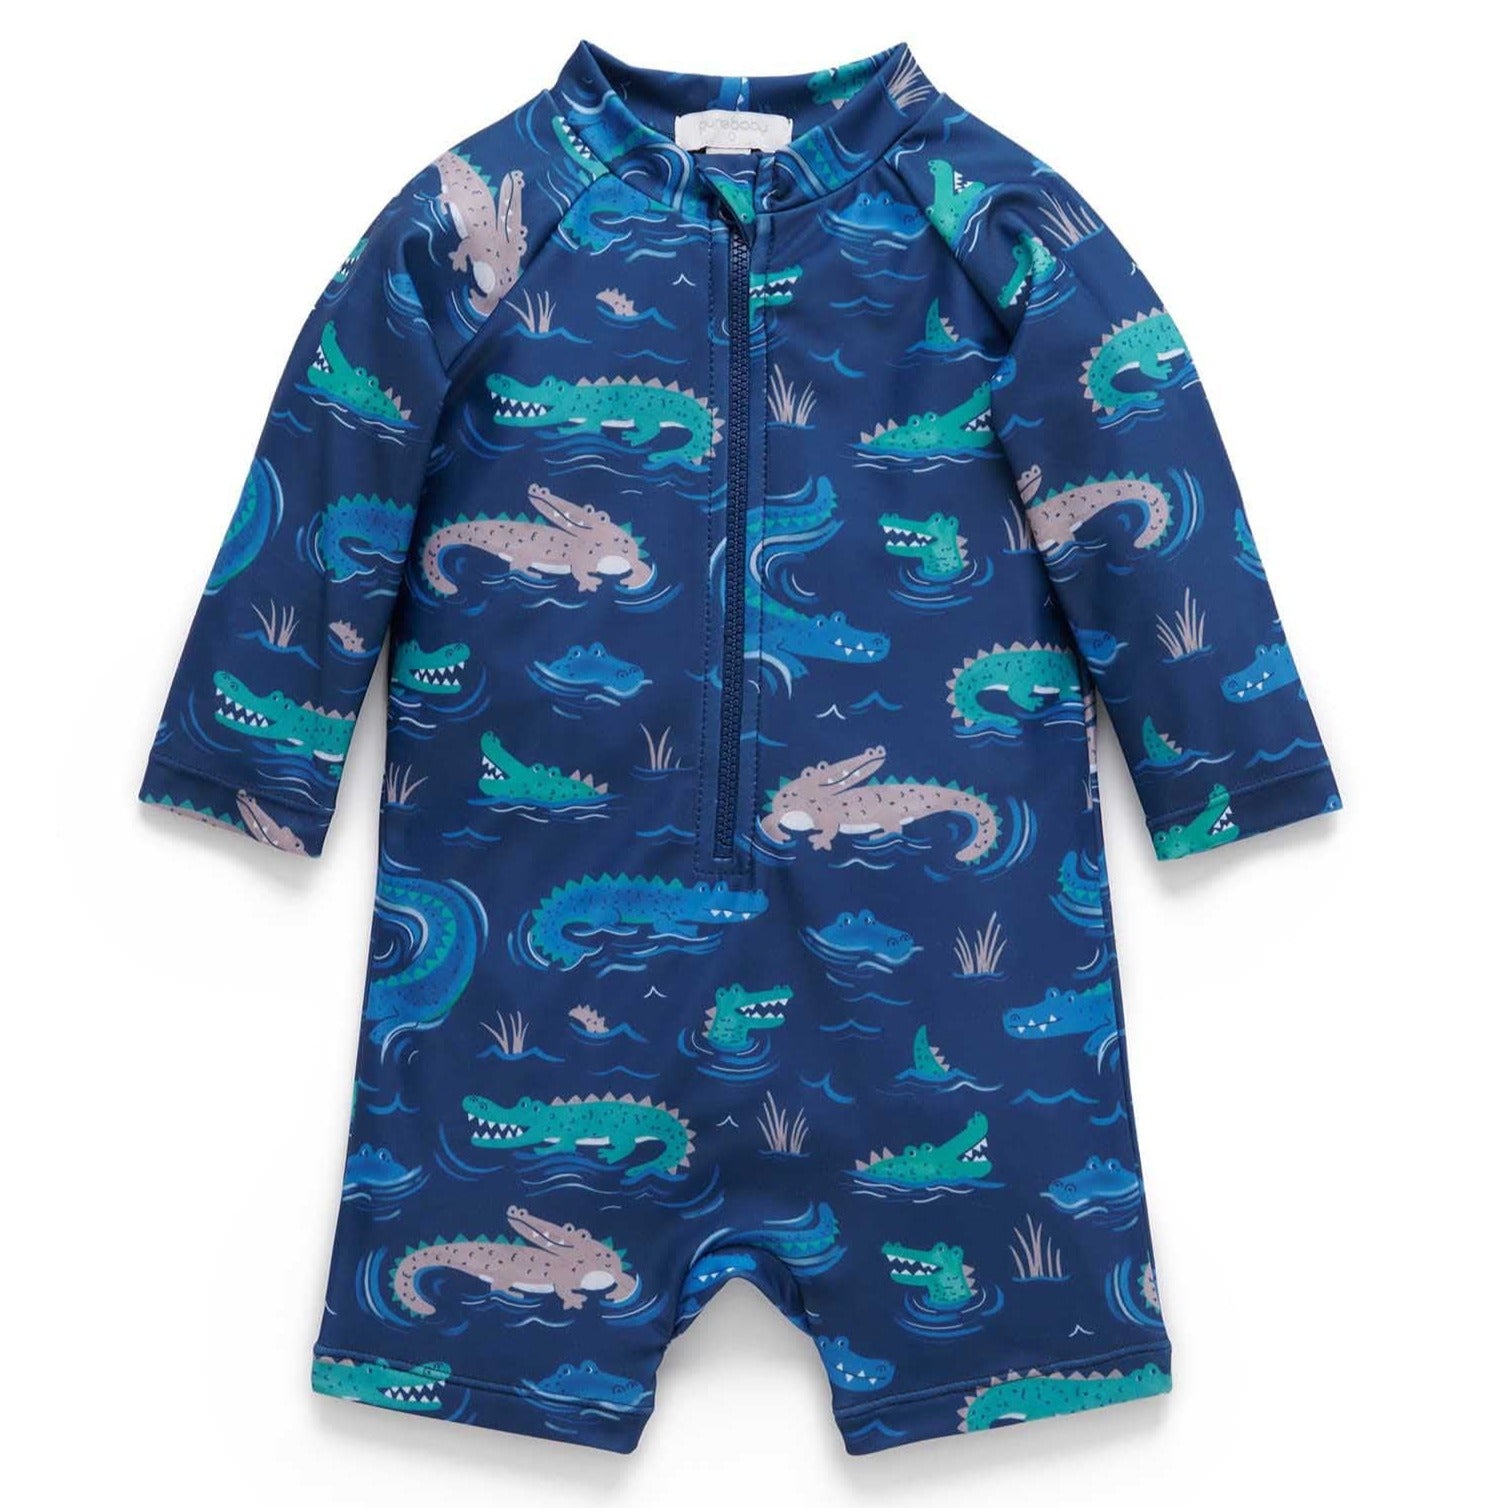 Purebaby swimsuit - Angus and Dudley